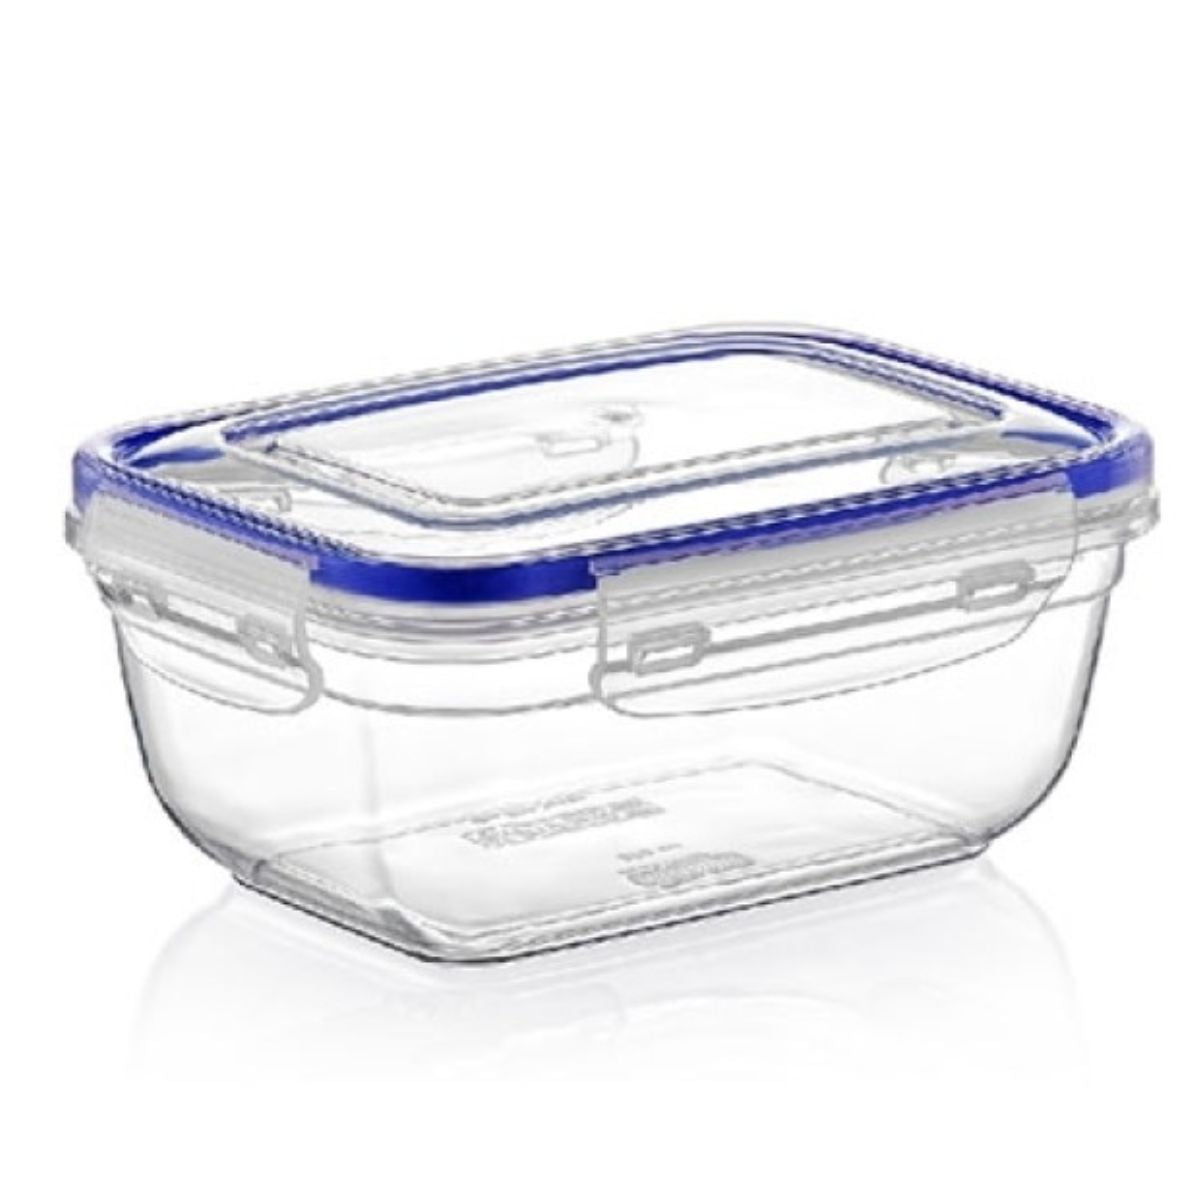 A Lock & Fresh - Seal Rectangle Storage - 2300ml with blue lid on a white background.